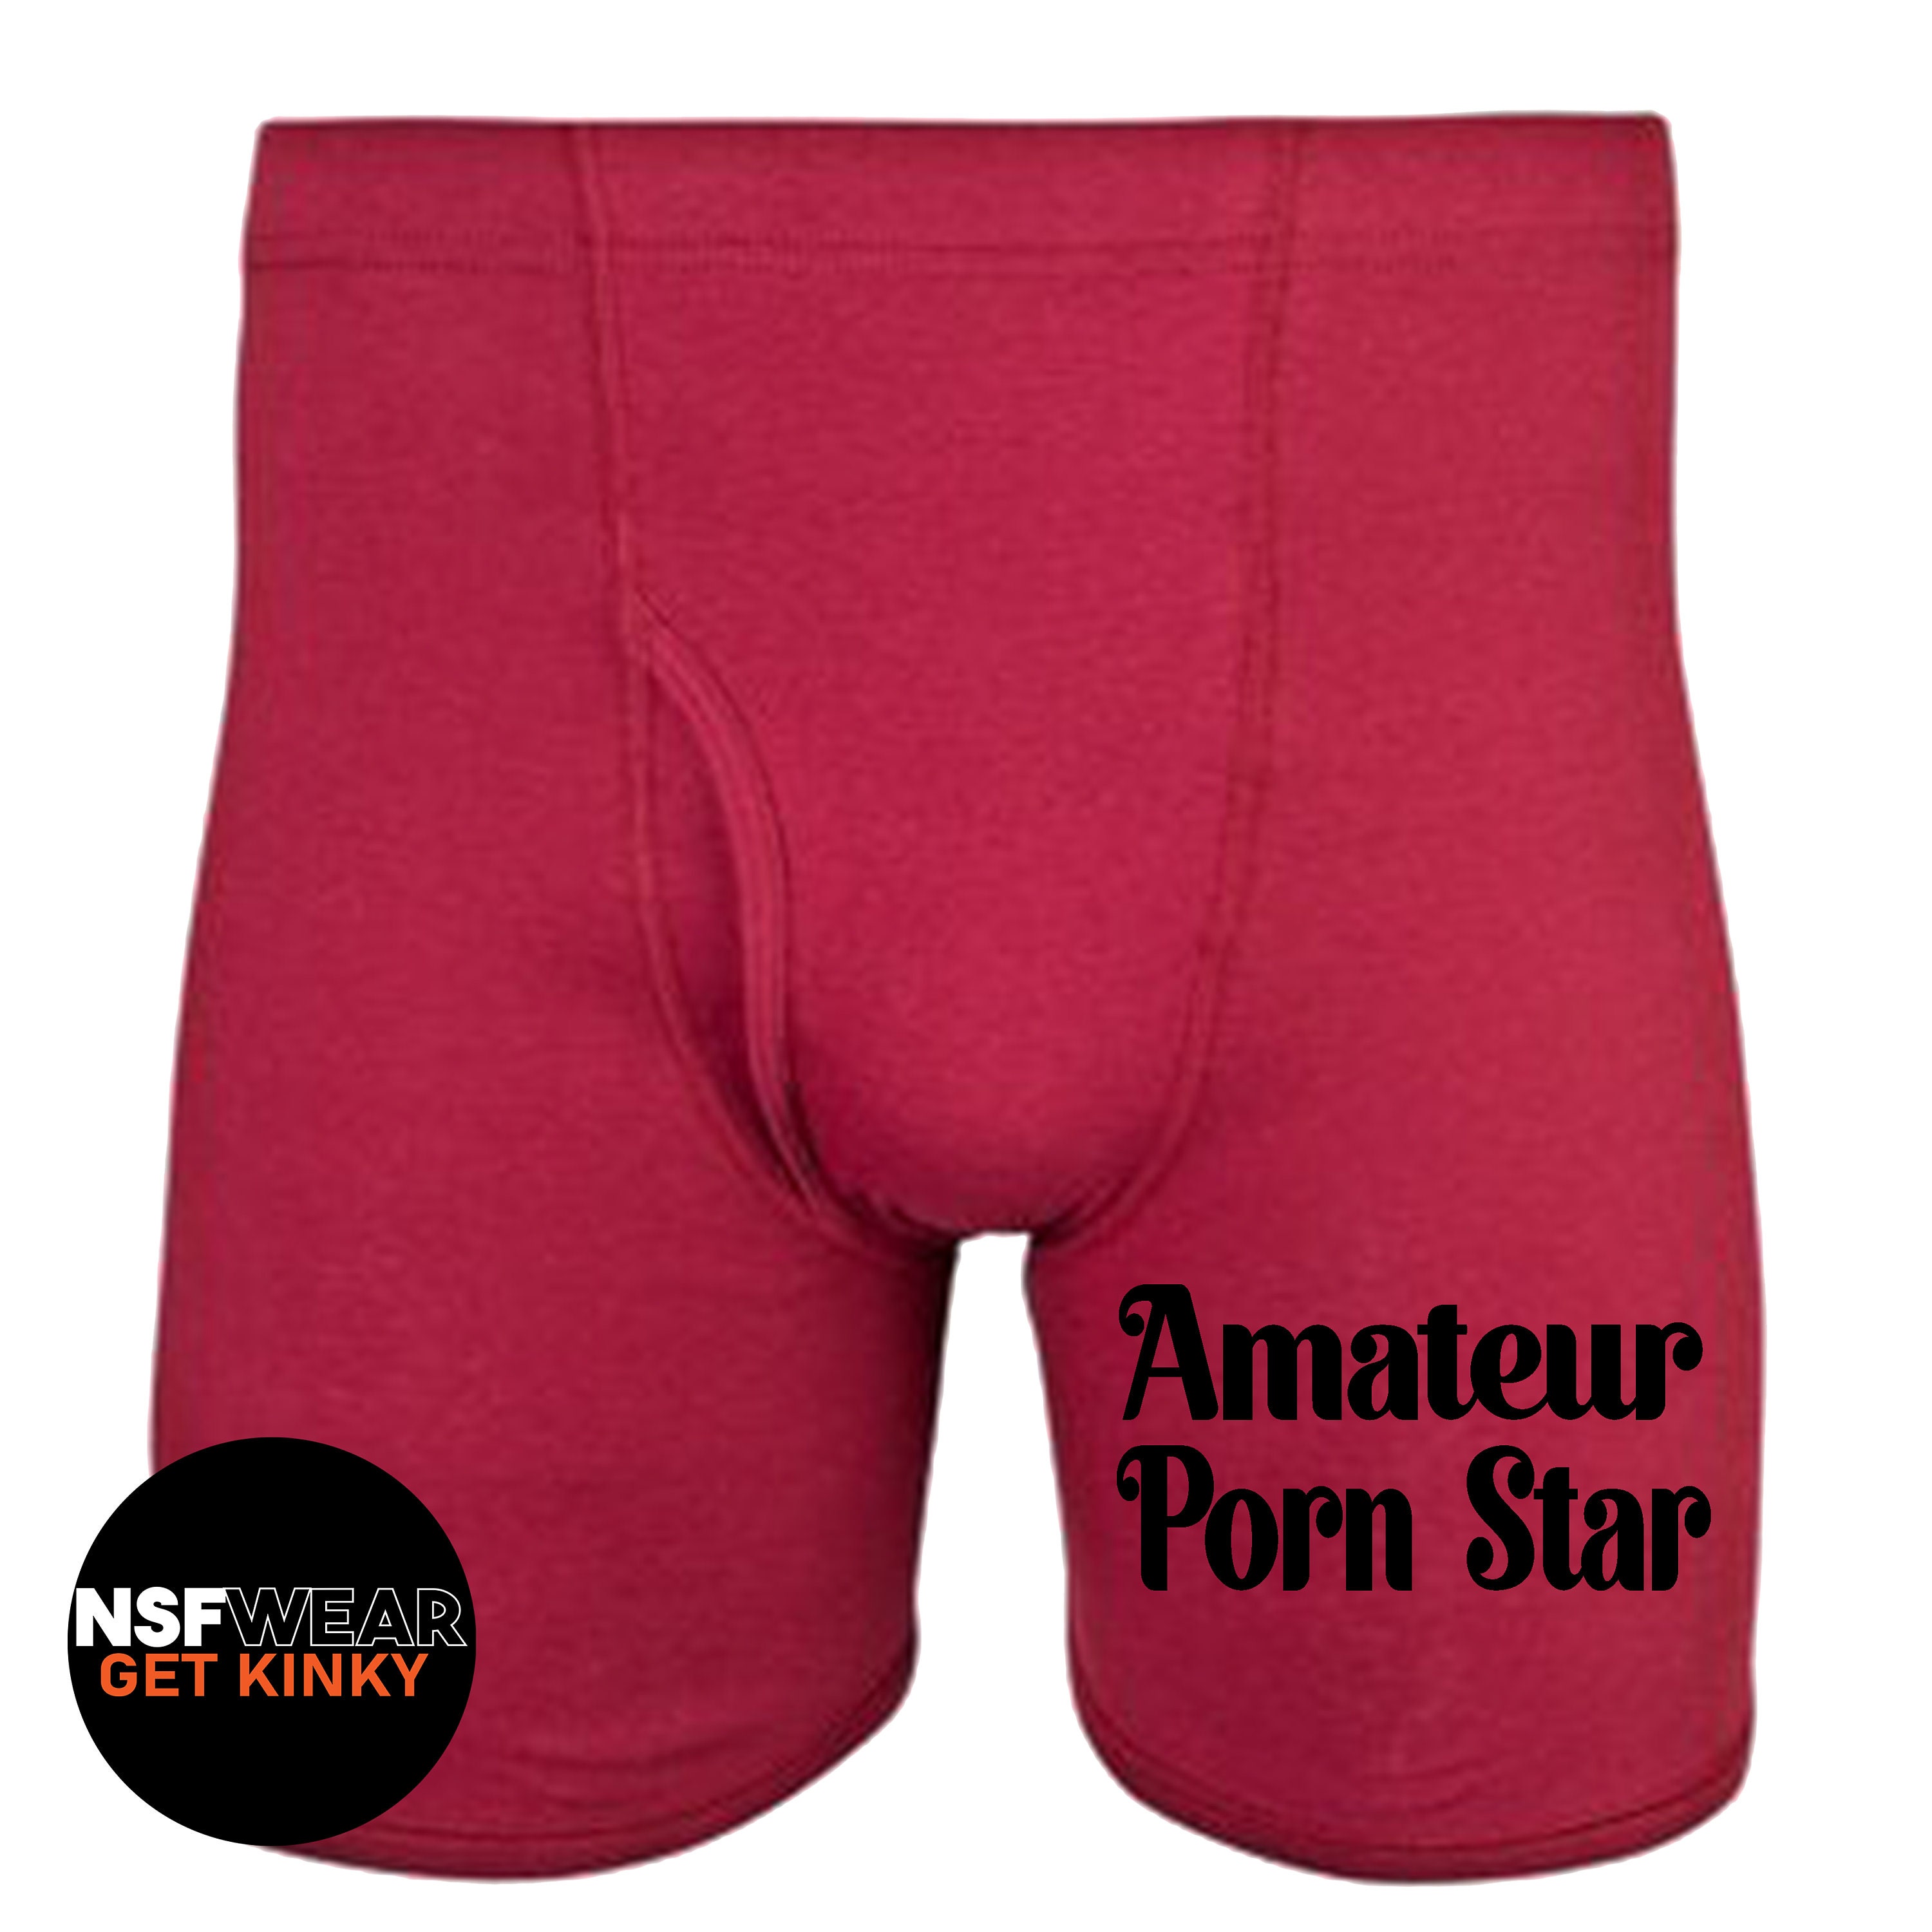 Amateur Porn Star Dirty Boxer Shorts Gift for